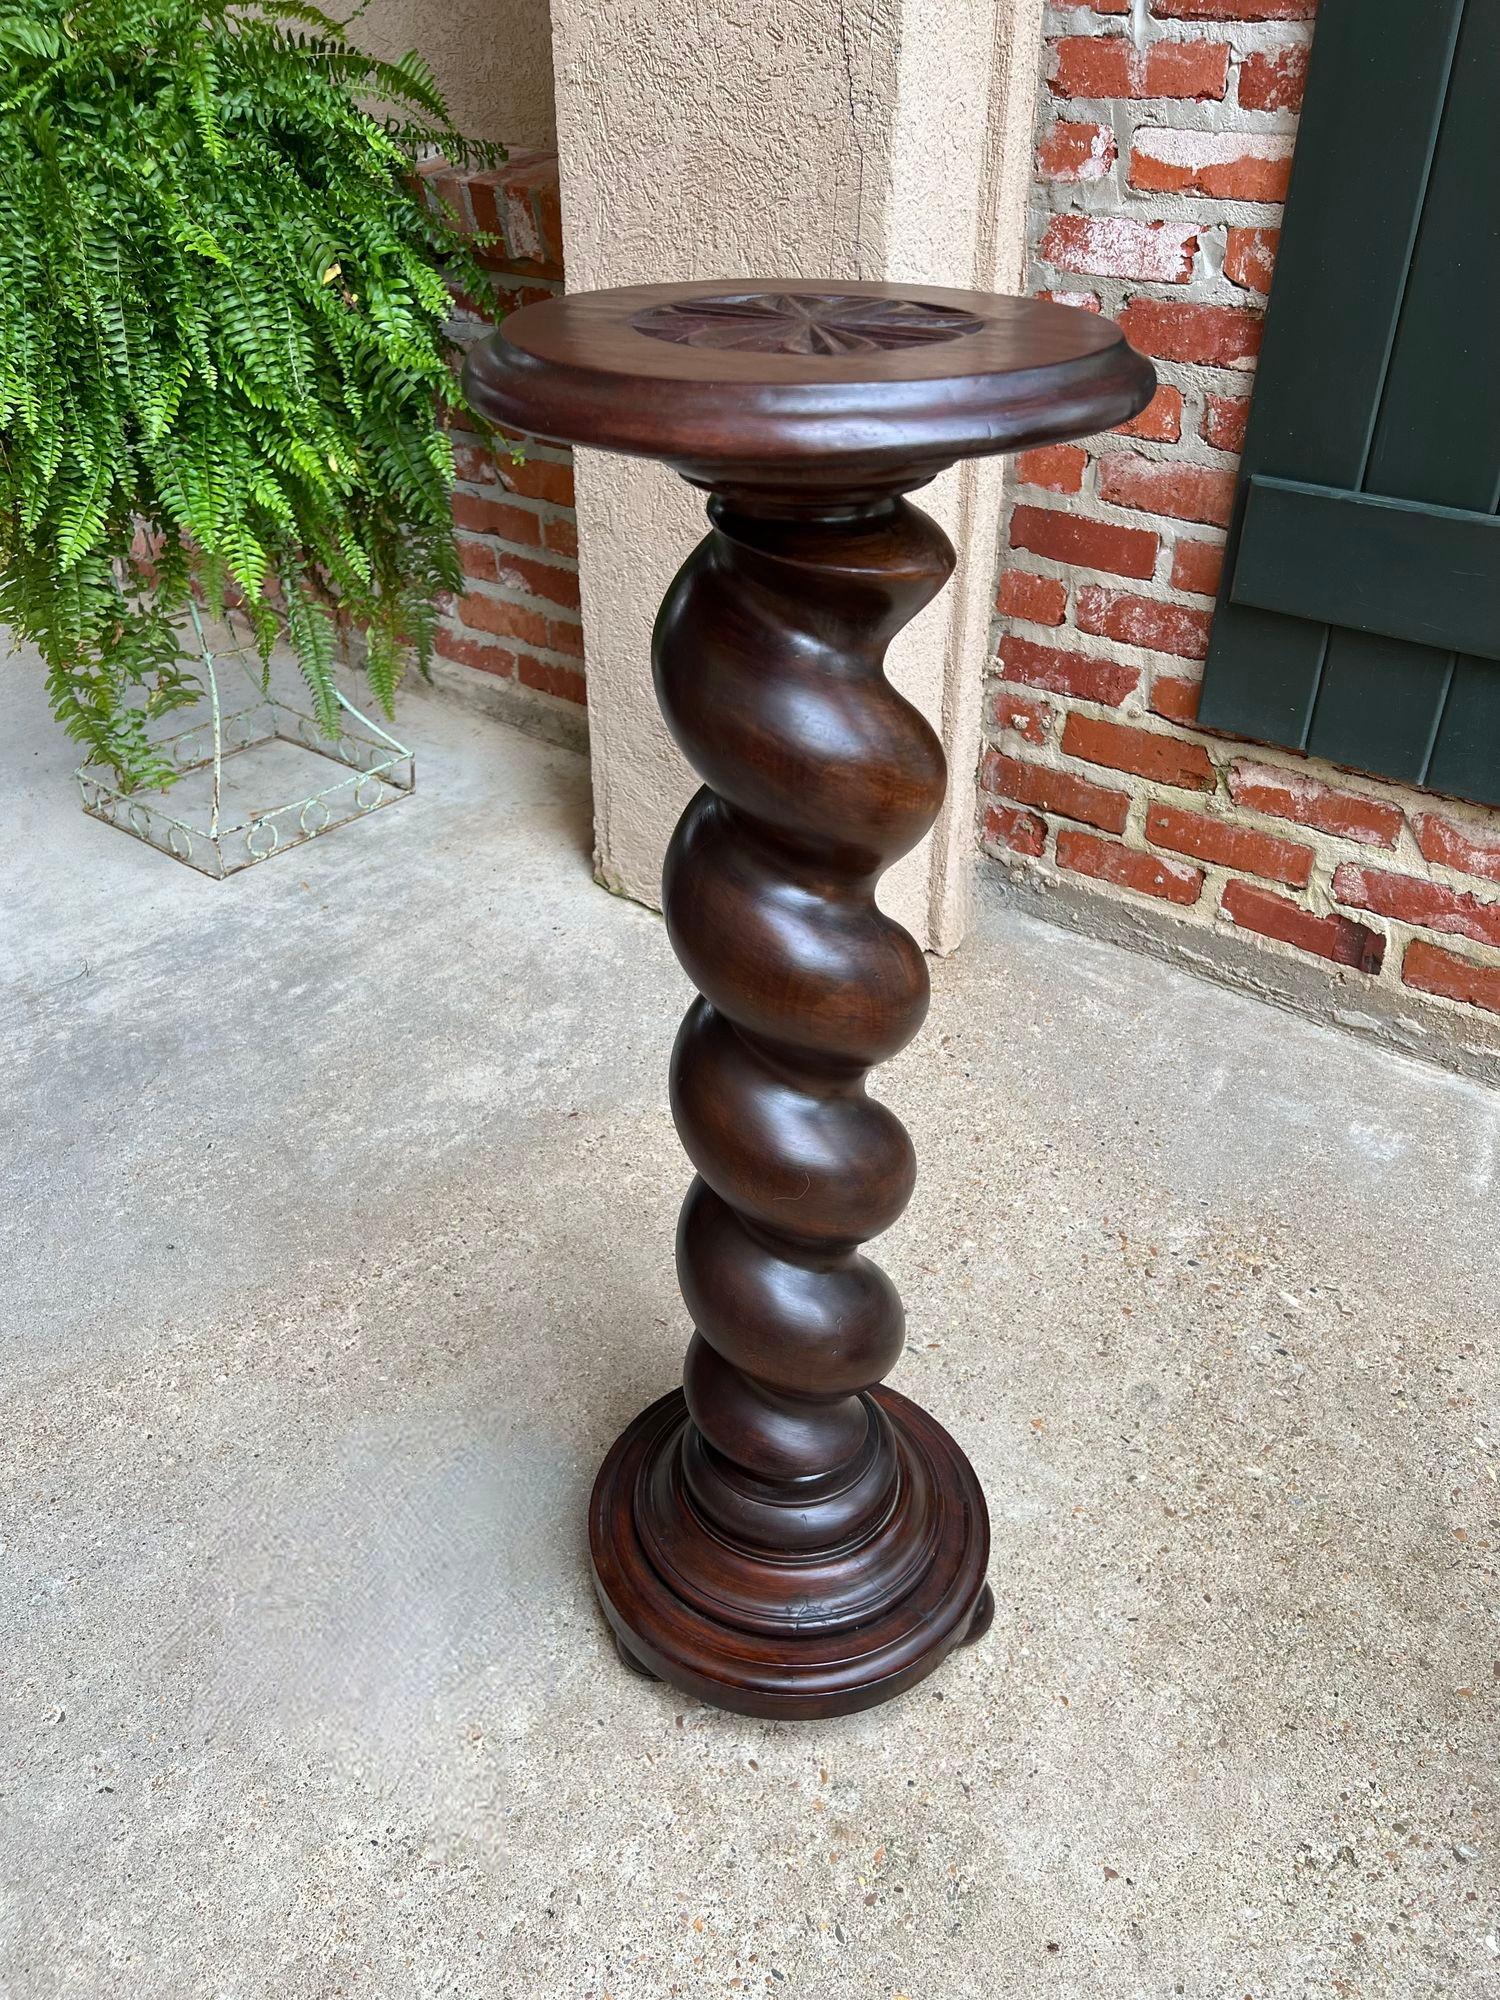 Antique French Pedestal Stand BARLEY TWIST Carved Oak Round Plant Display Column.

Direct from France, a carved and extremely thick barley twist pedestal stand! Perfect as a plant stand, gorgeous to use for display of your favorite majolica